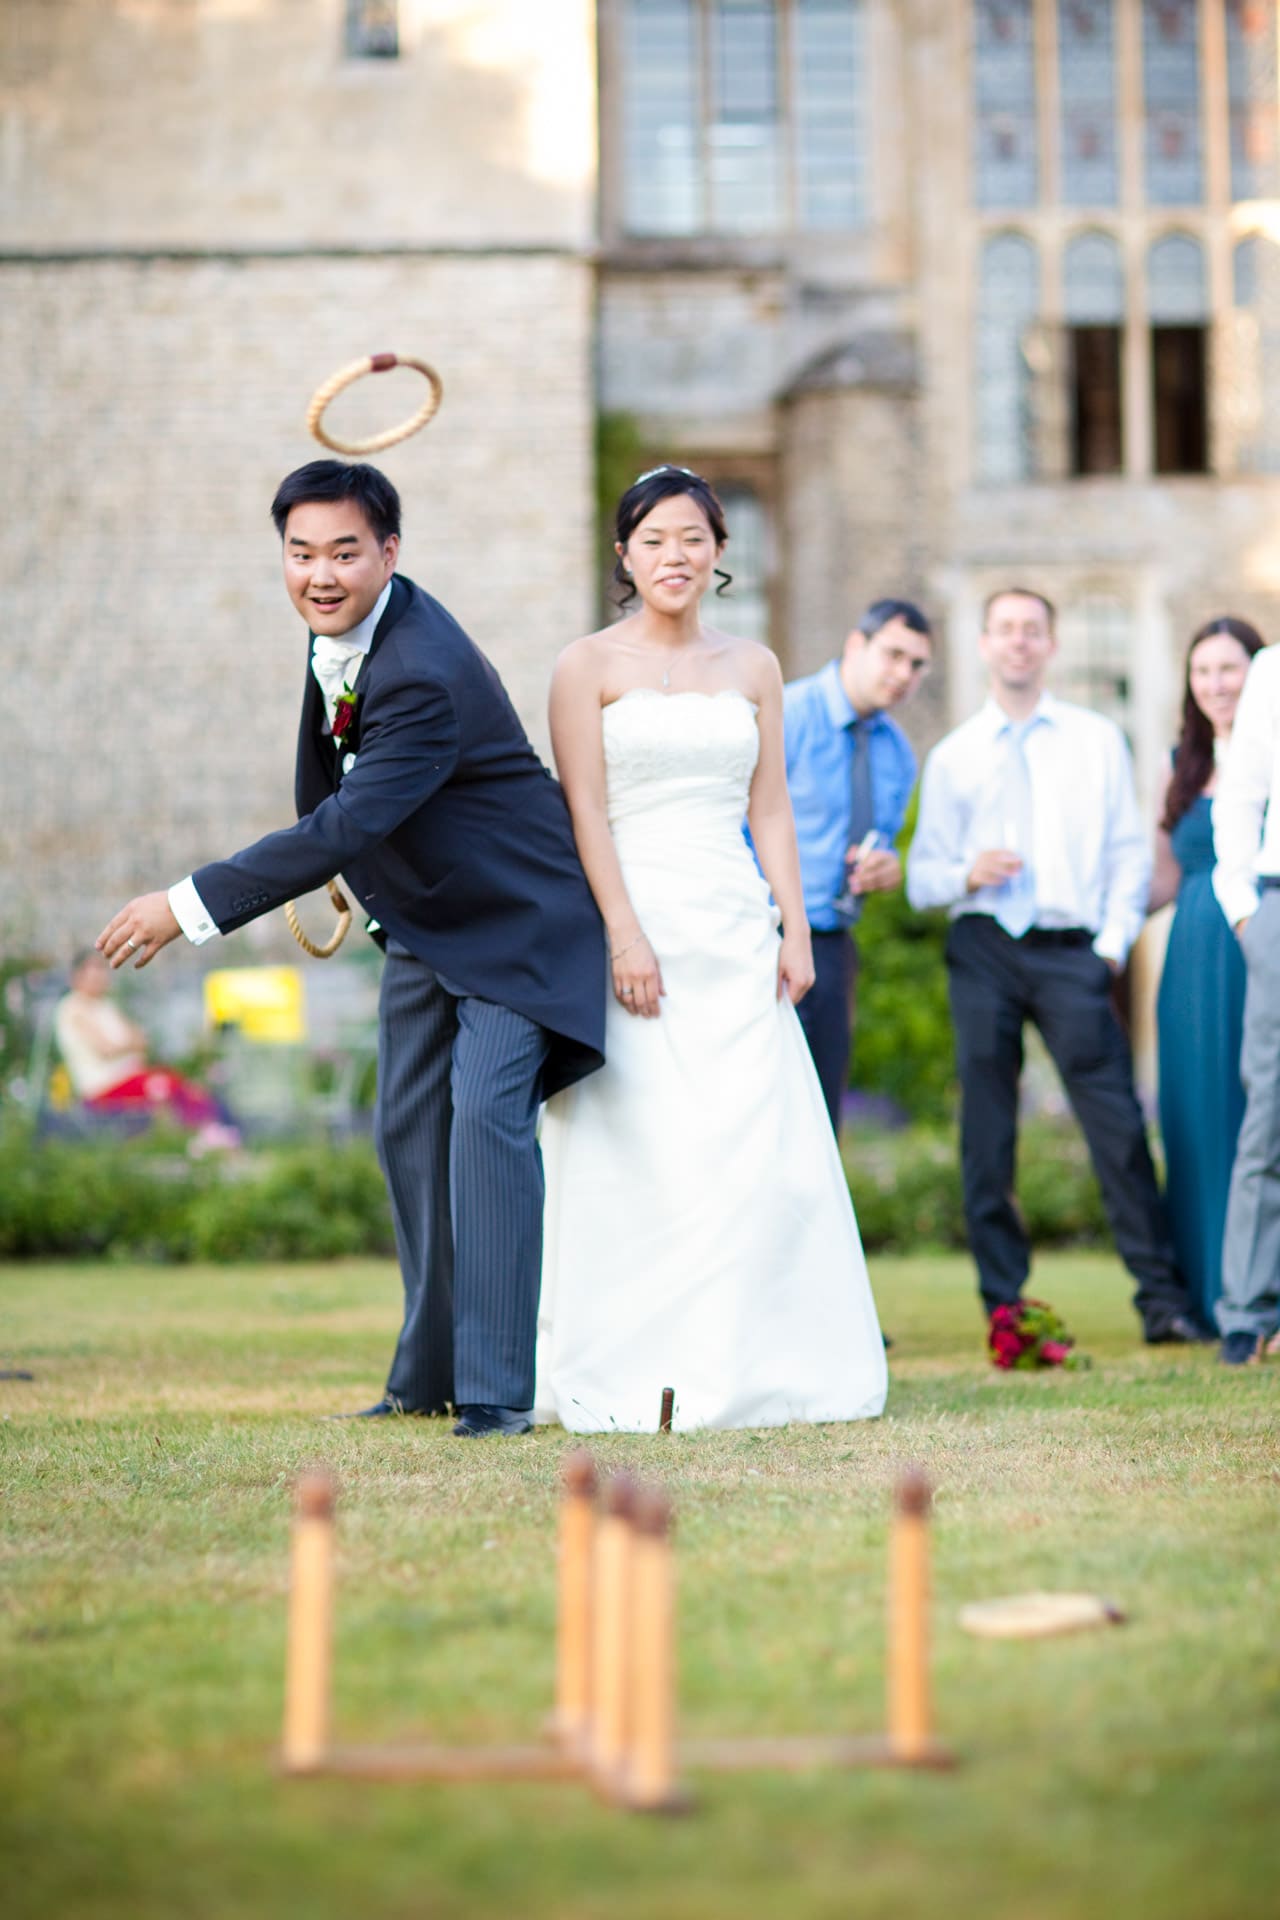 rope ring toss wedding games